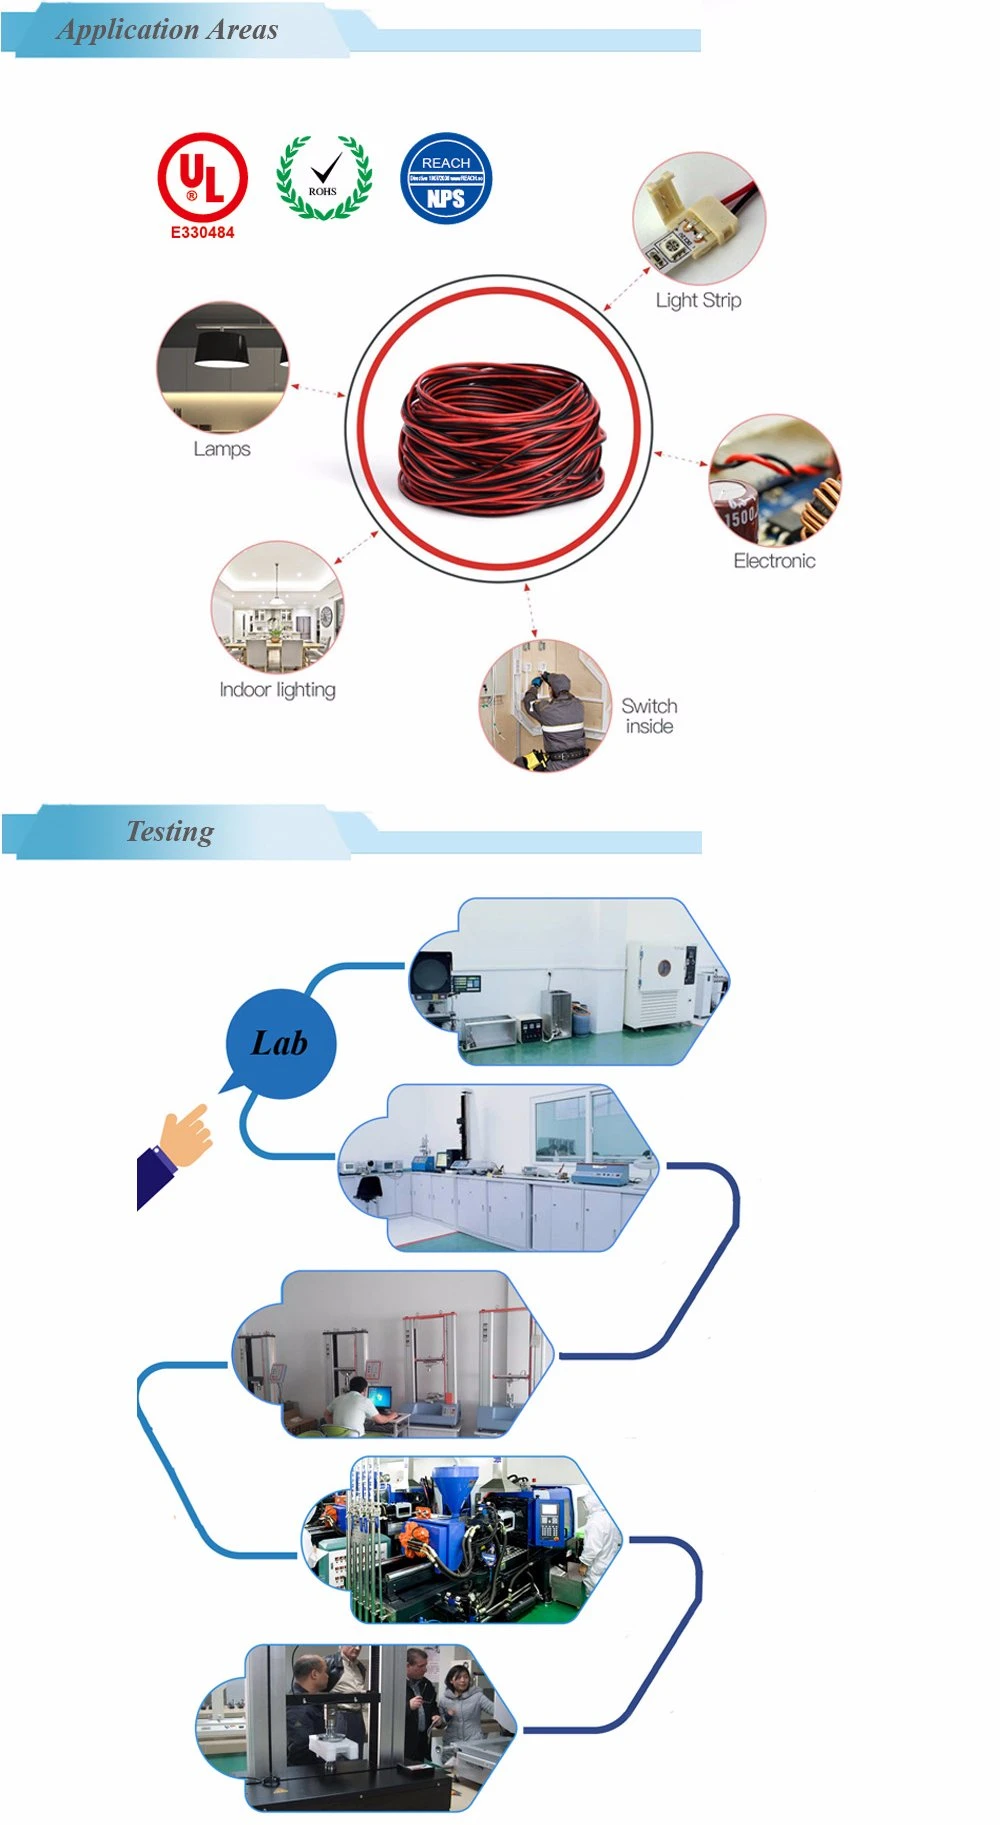 UL1430 16 AWG Bare Copper Conductor Insulated Irradiated Xlpvc Wire Cable Wire Harness Electric Wire